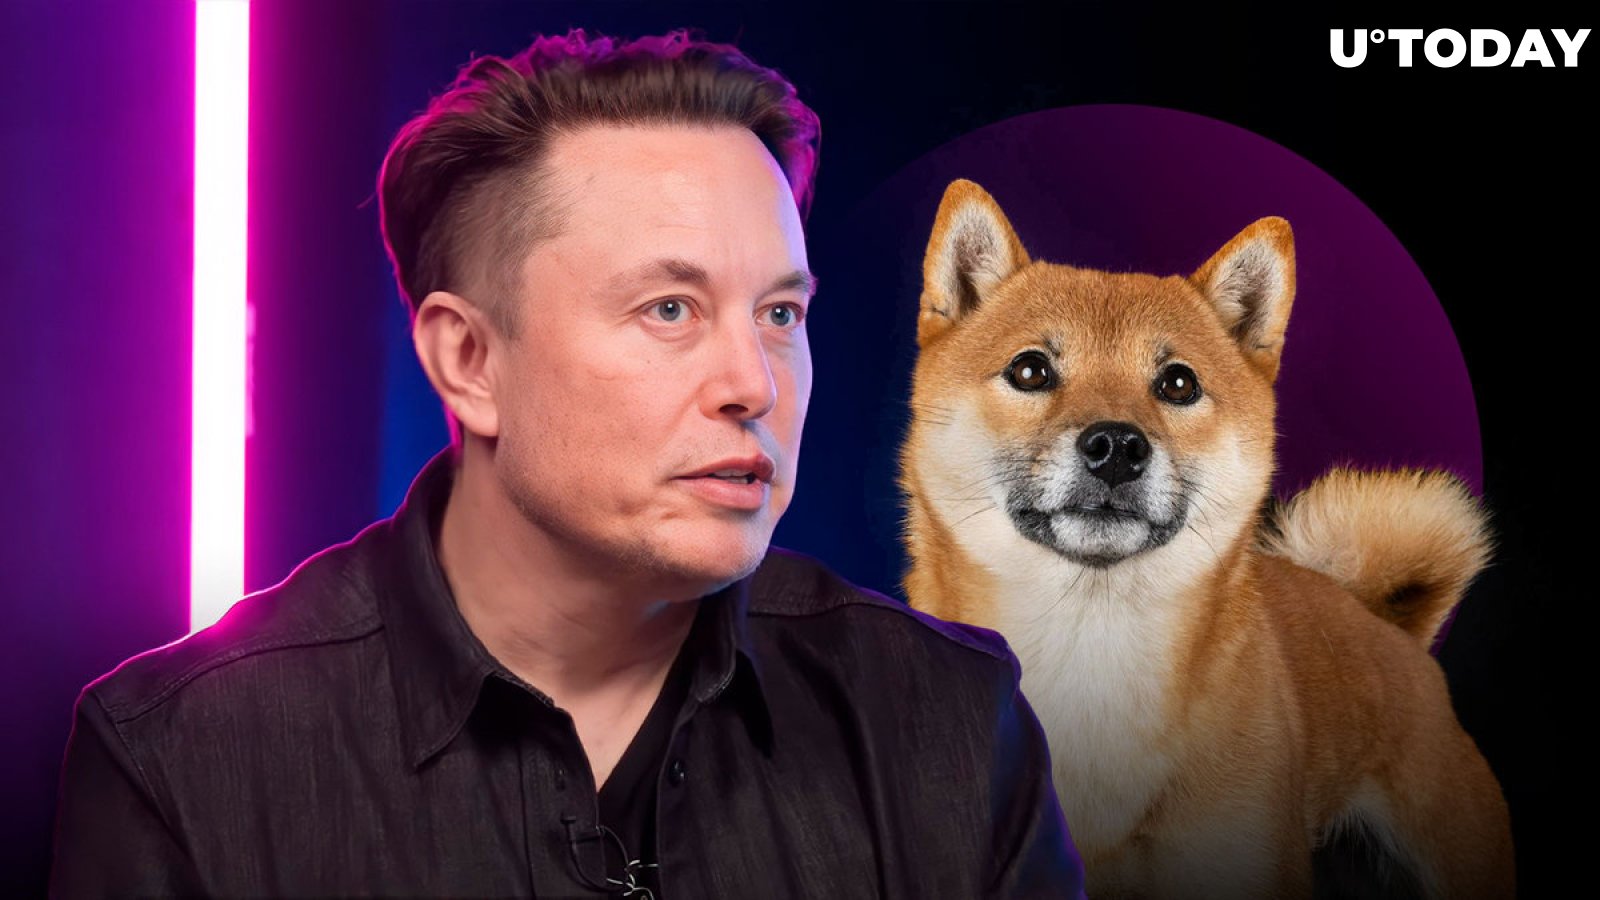 Elon Musk Excites Crypto Community With His New Doge Tweet